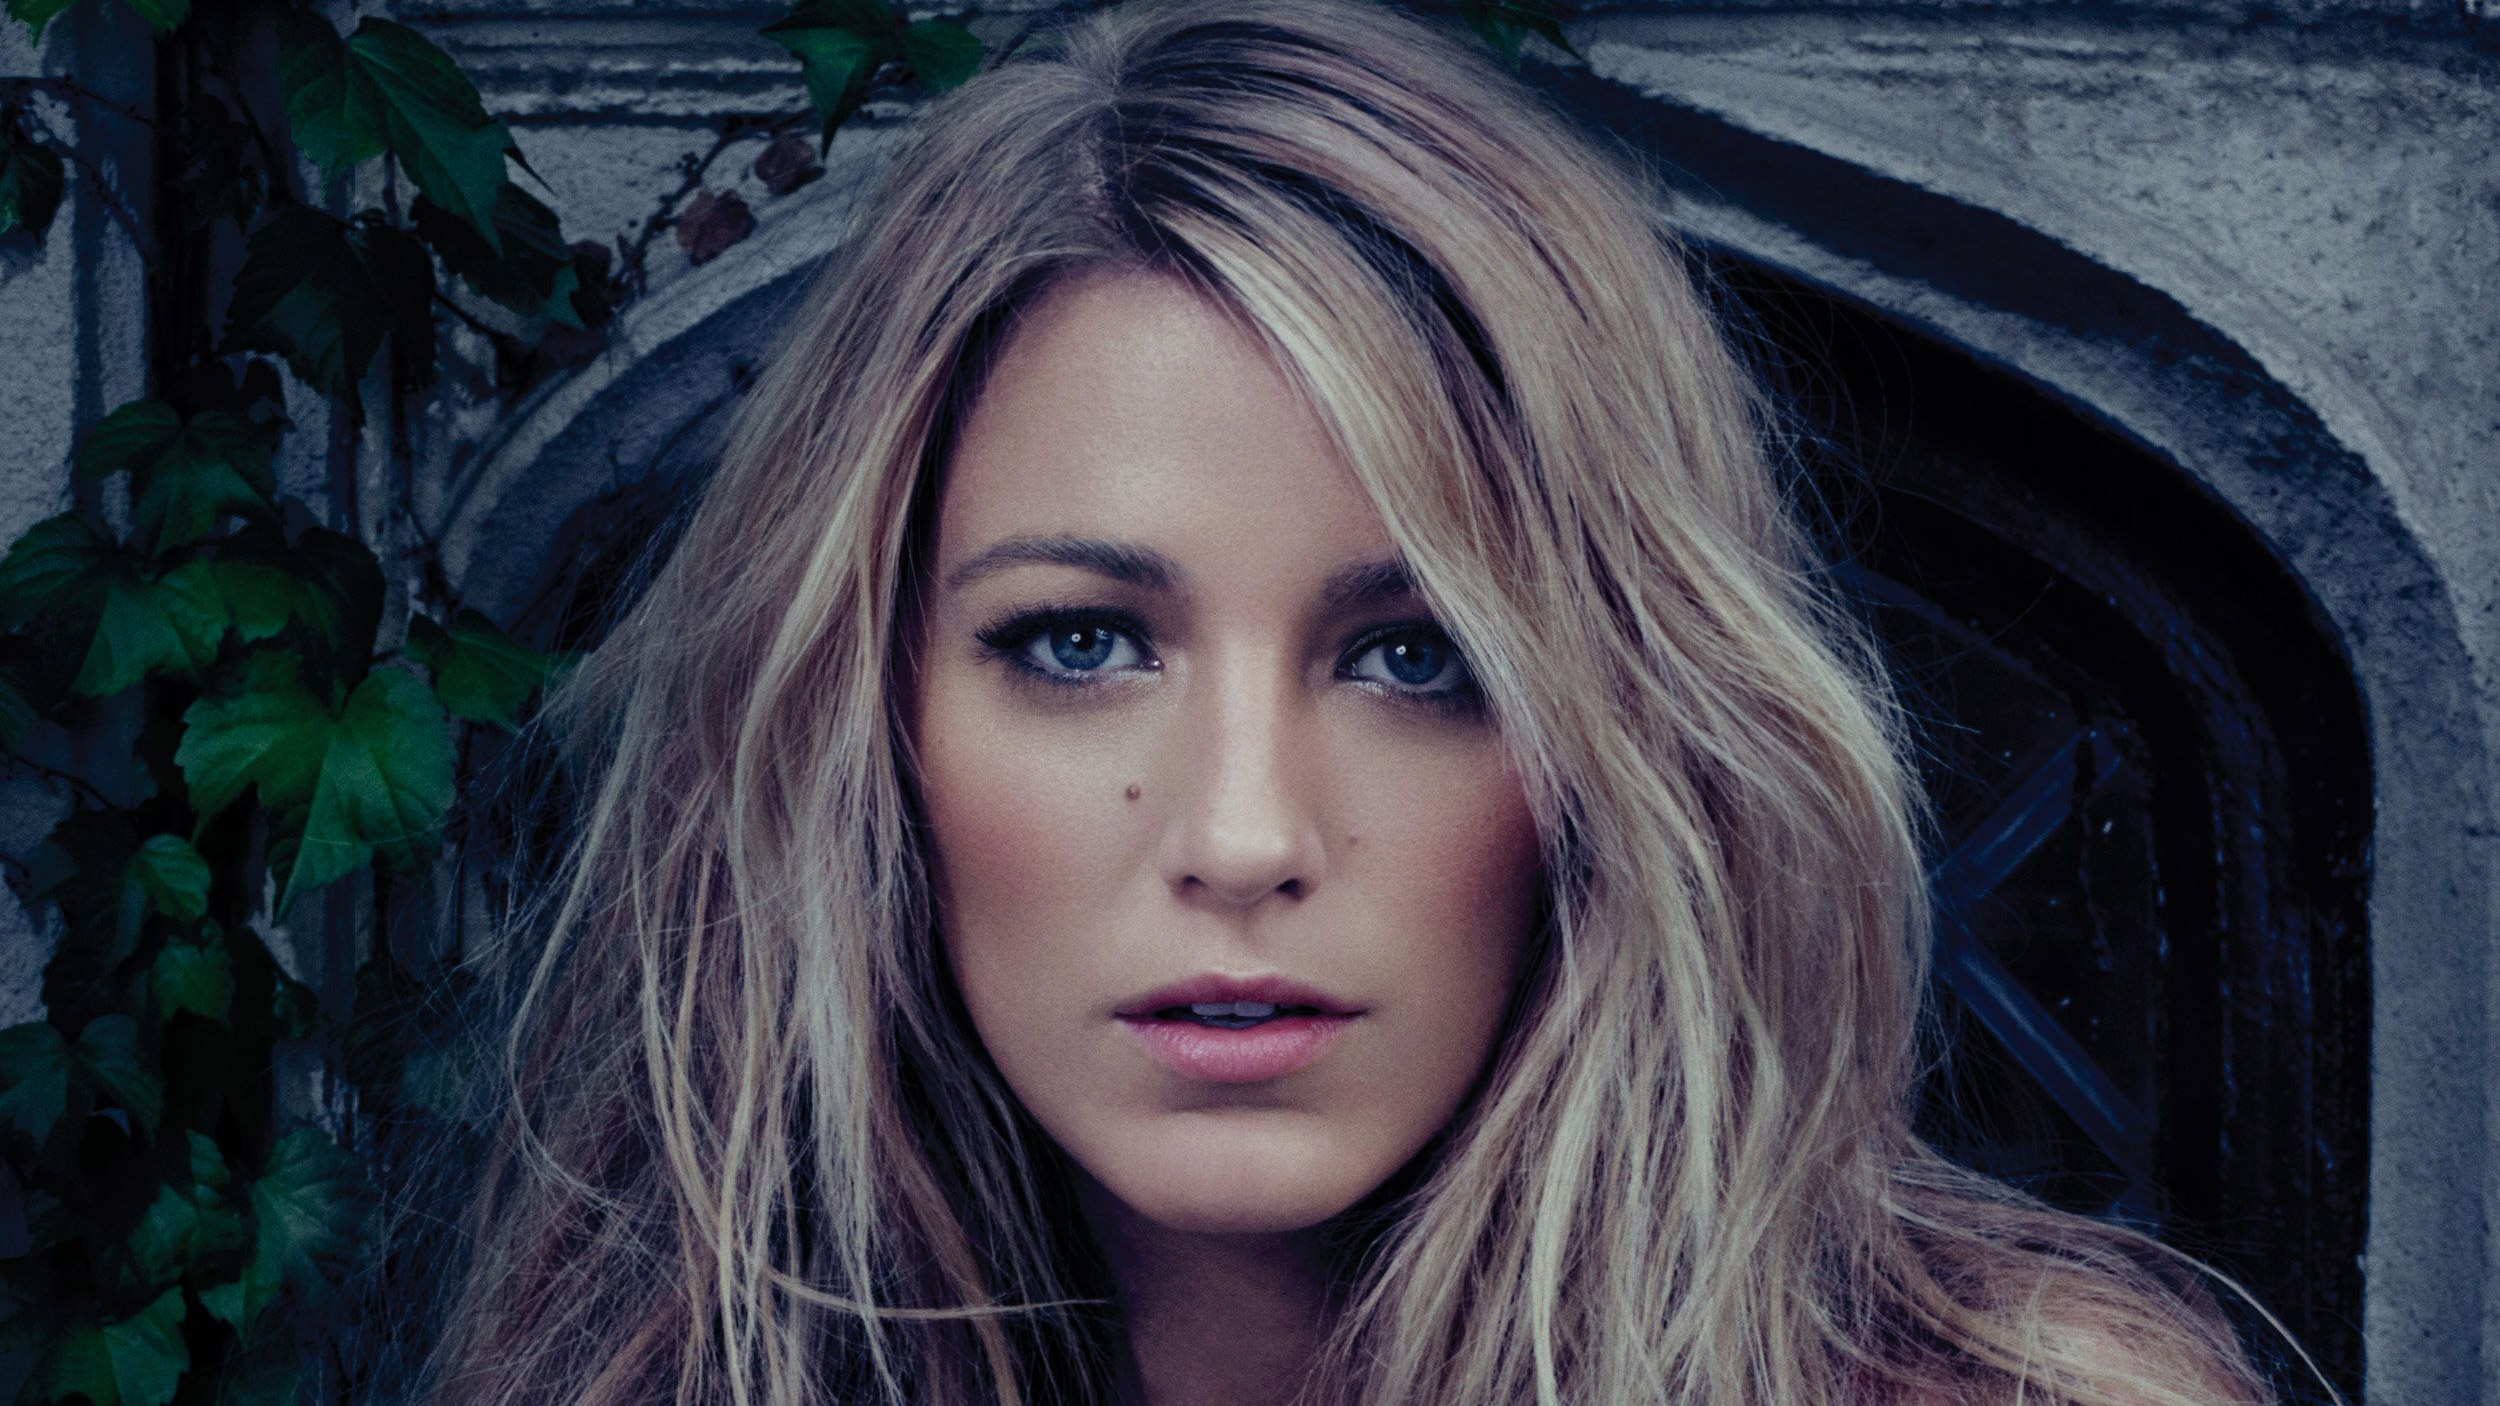 2. Blake Lively - wide 9